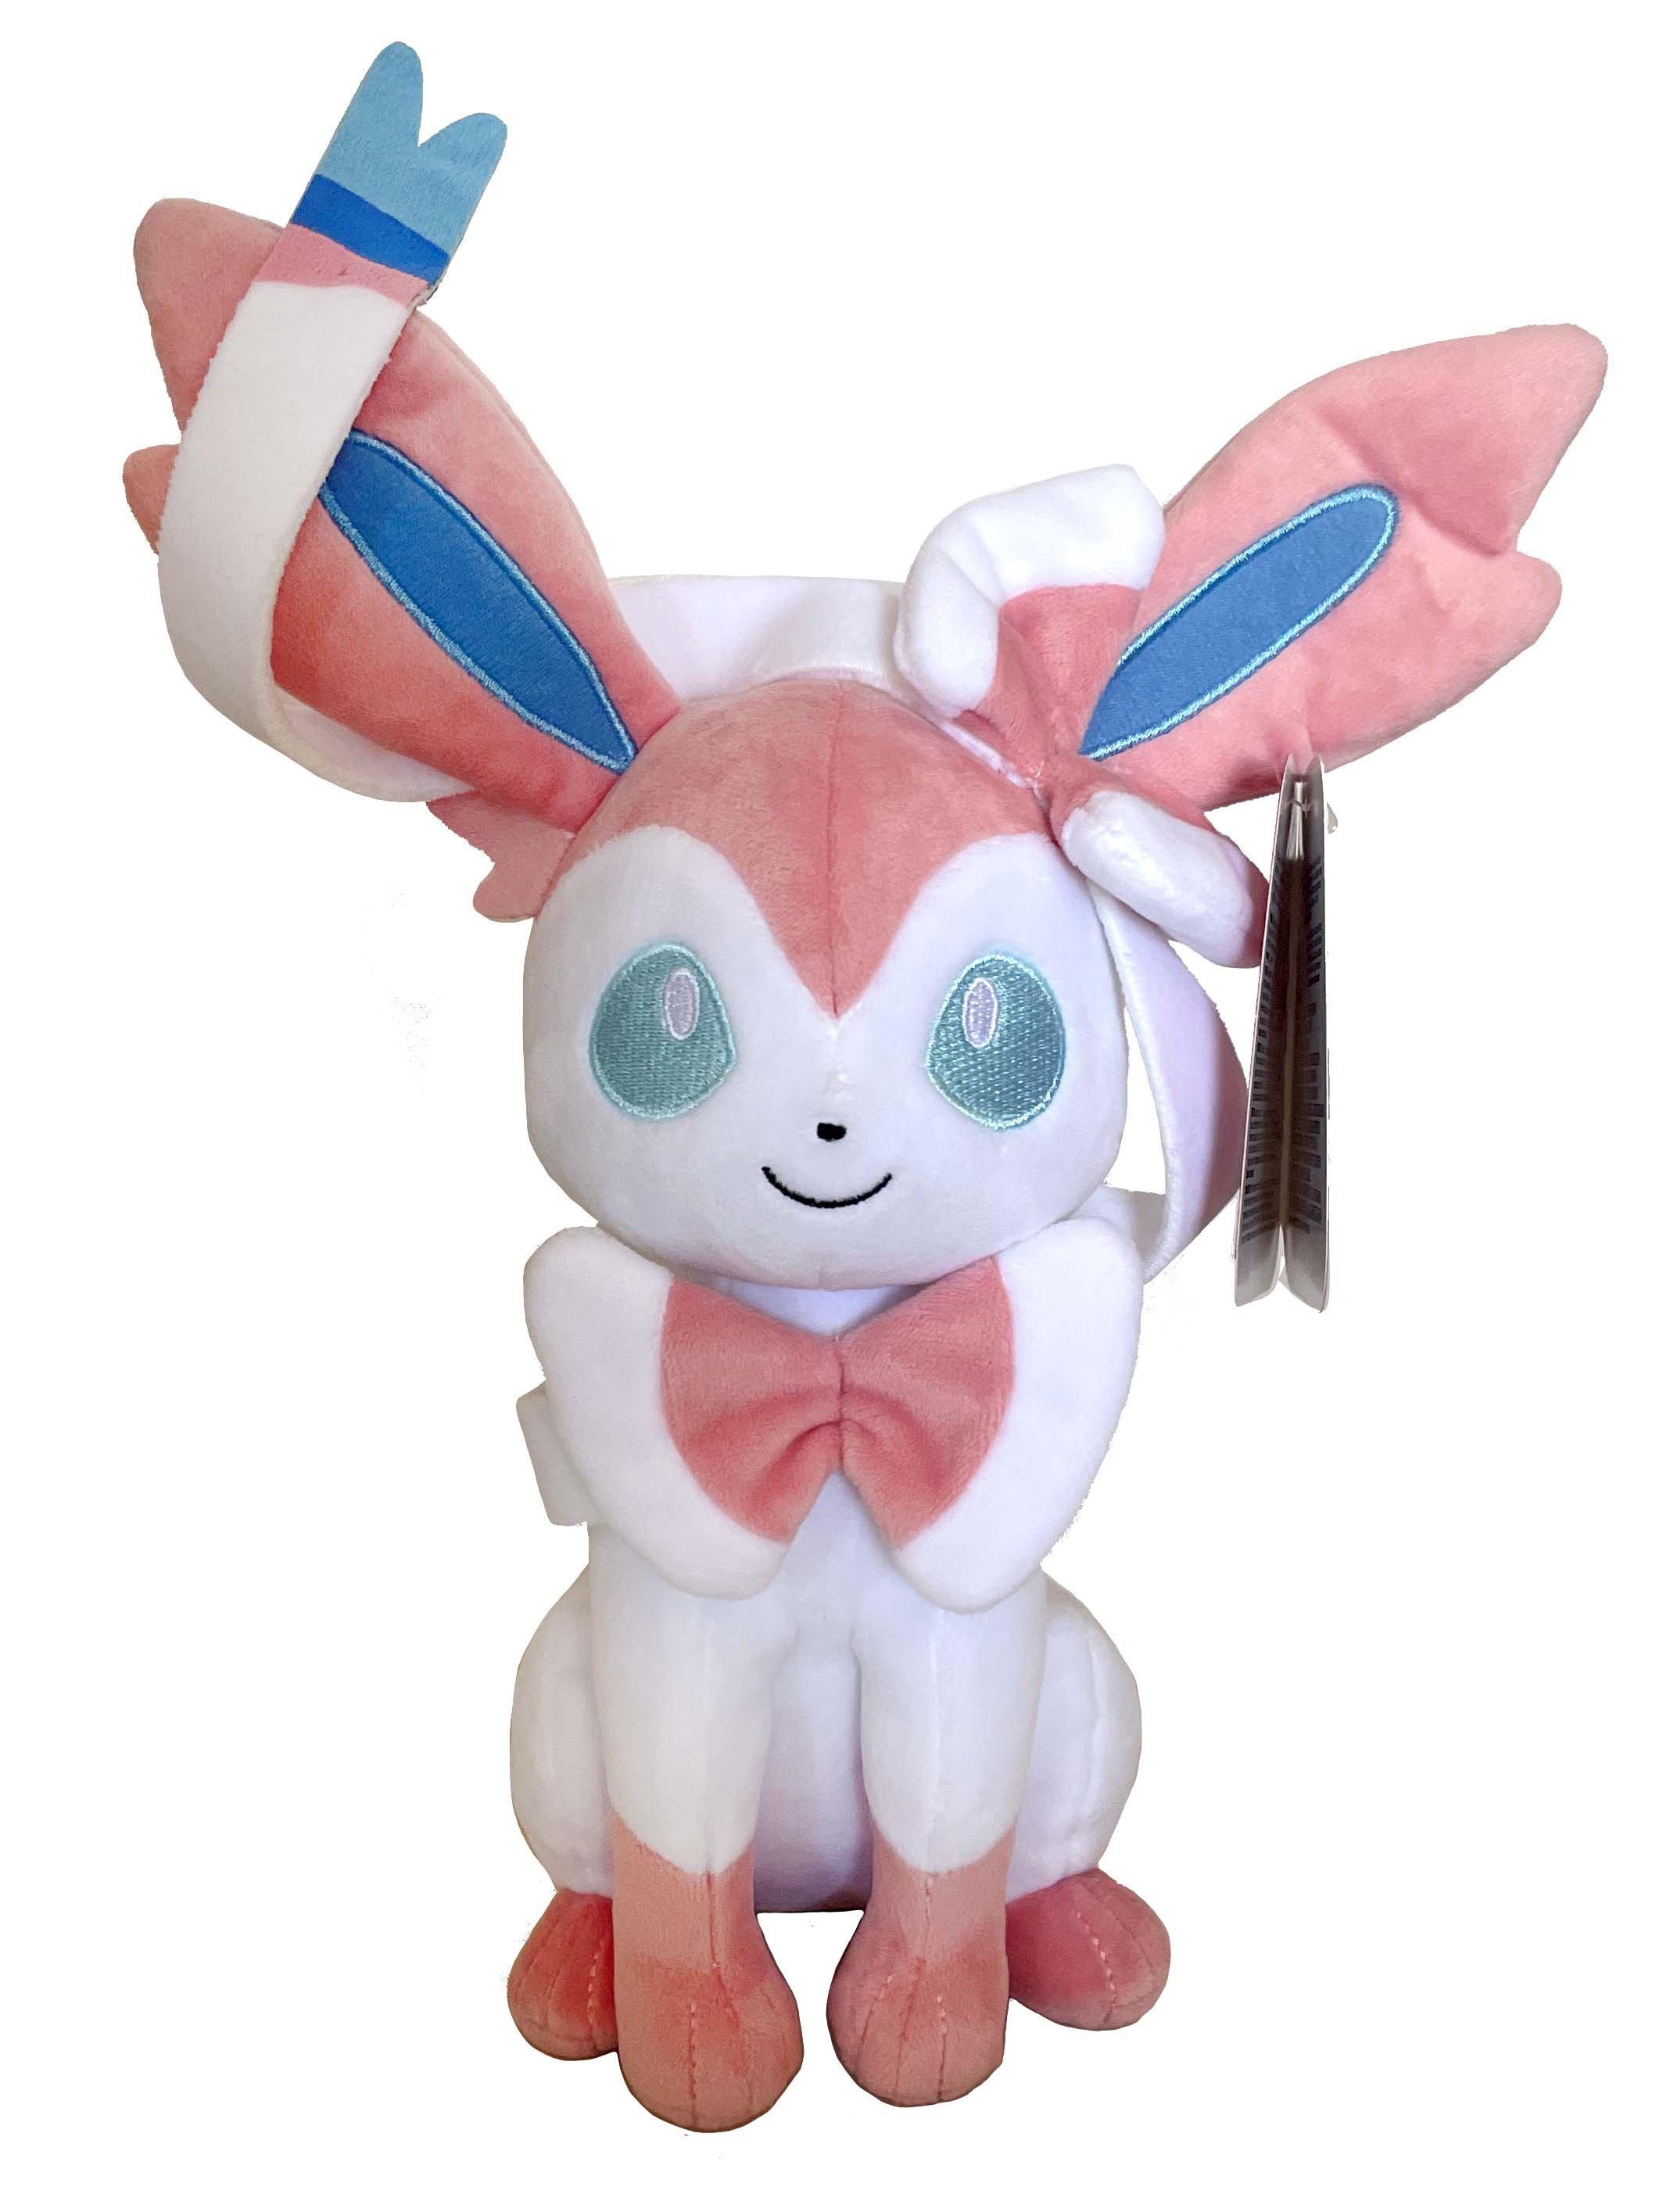 Pokemon 8in Plush 3-Pack (Sylveon, Glaceon, Leafeon) GameStop Exclusive